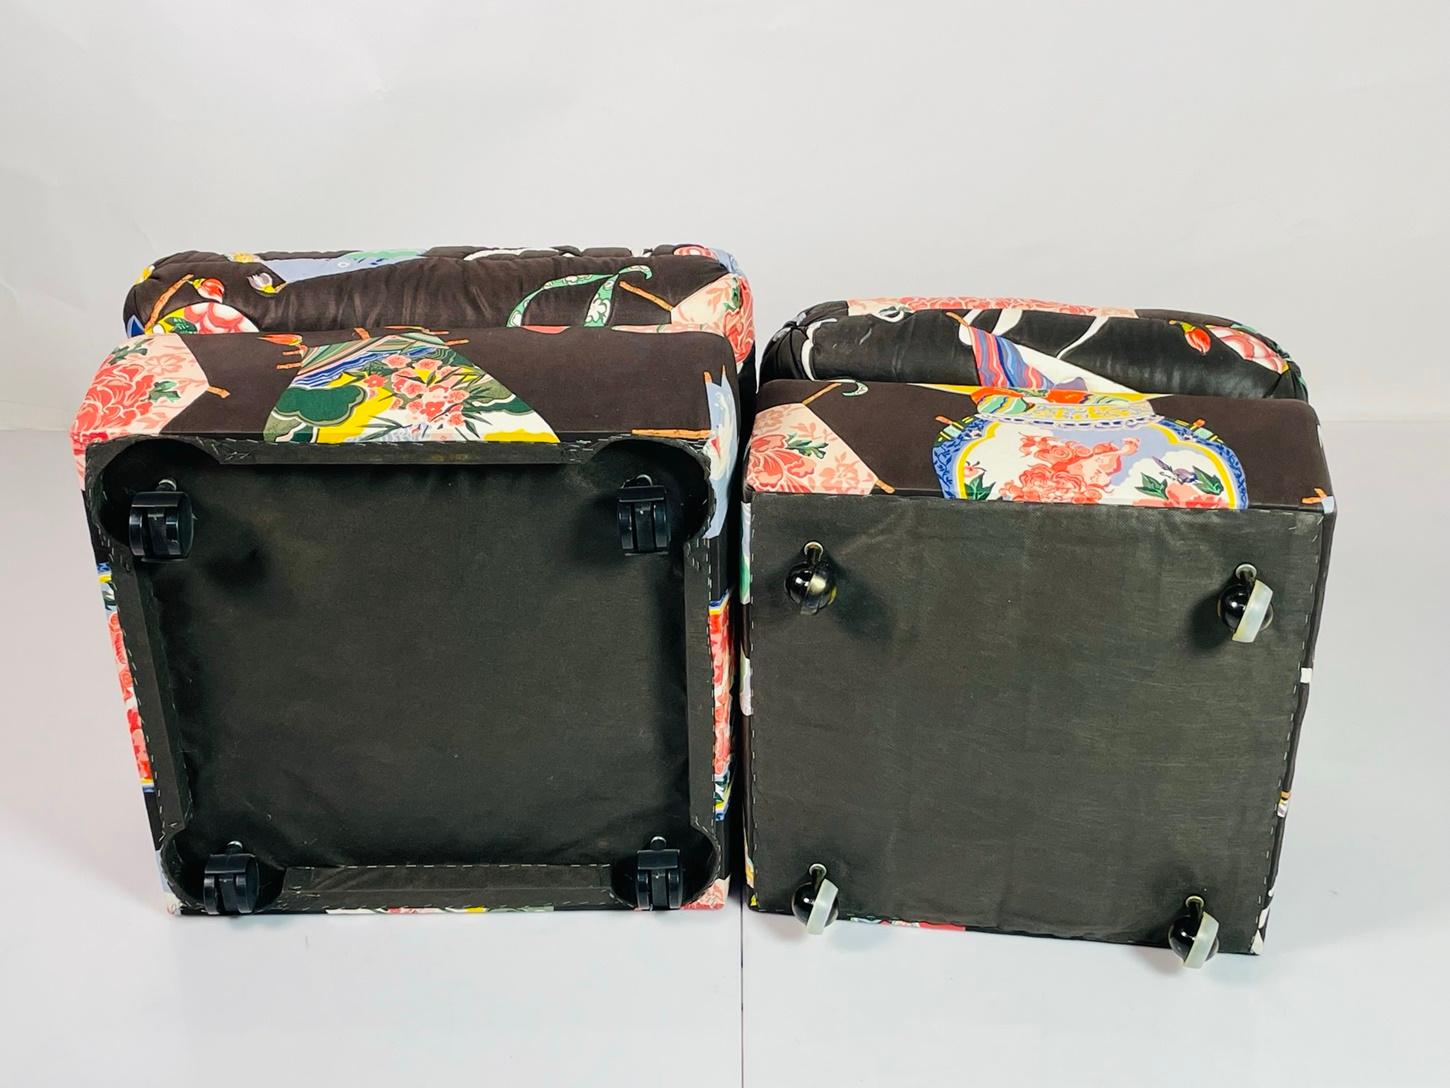 Pair of Vintage Ottomans/Poufs Upholstered in Asian Print Fabric In Good Condition For Sale In Los Angeles, CA